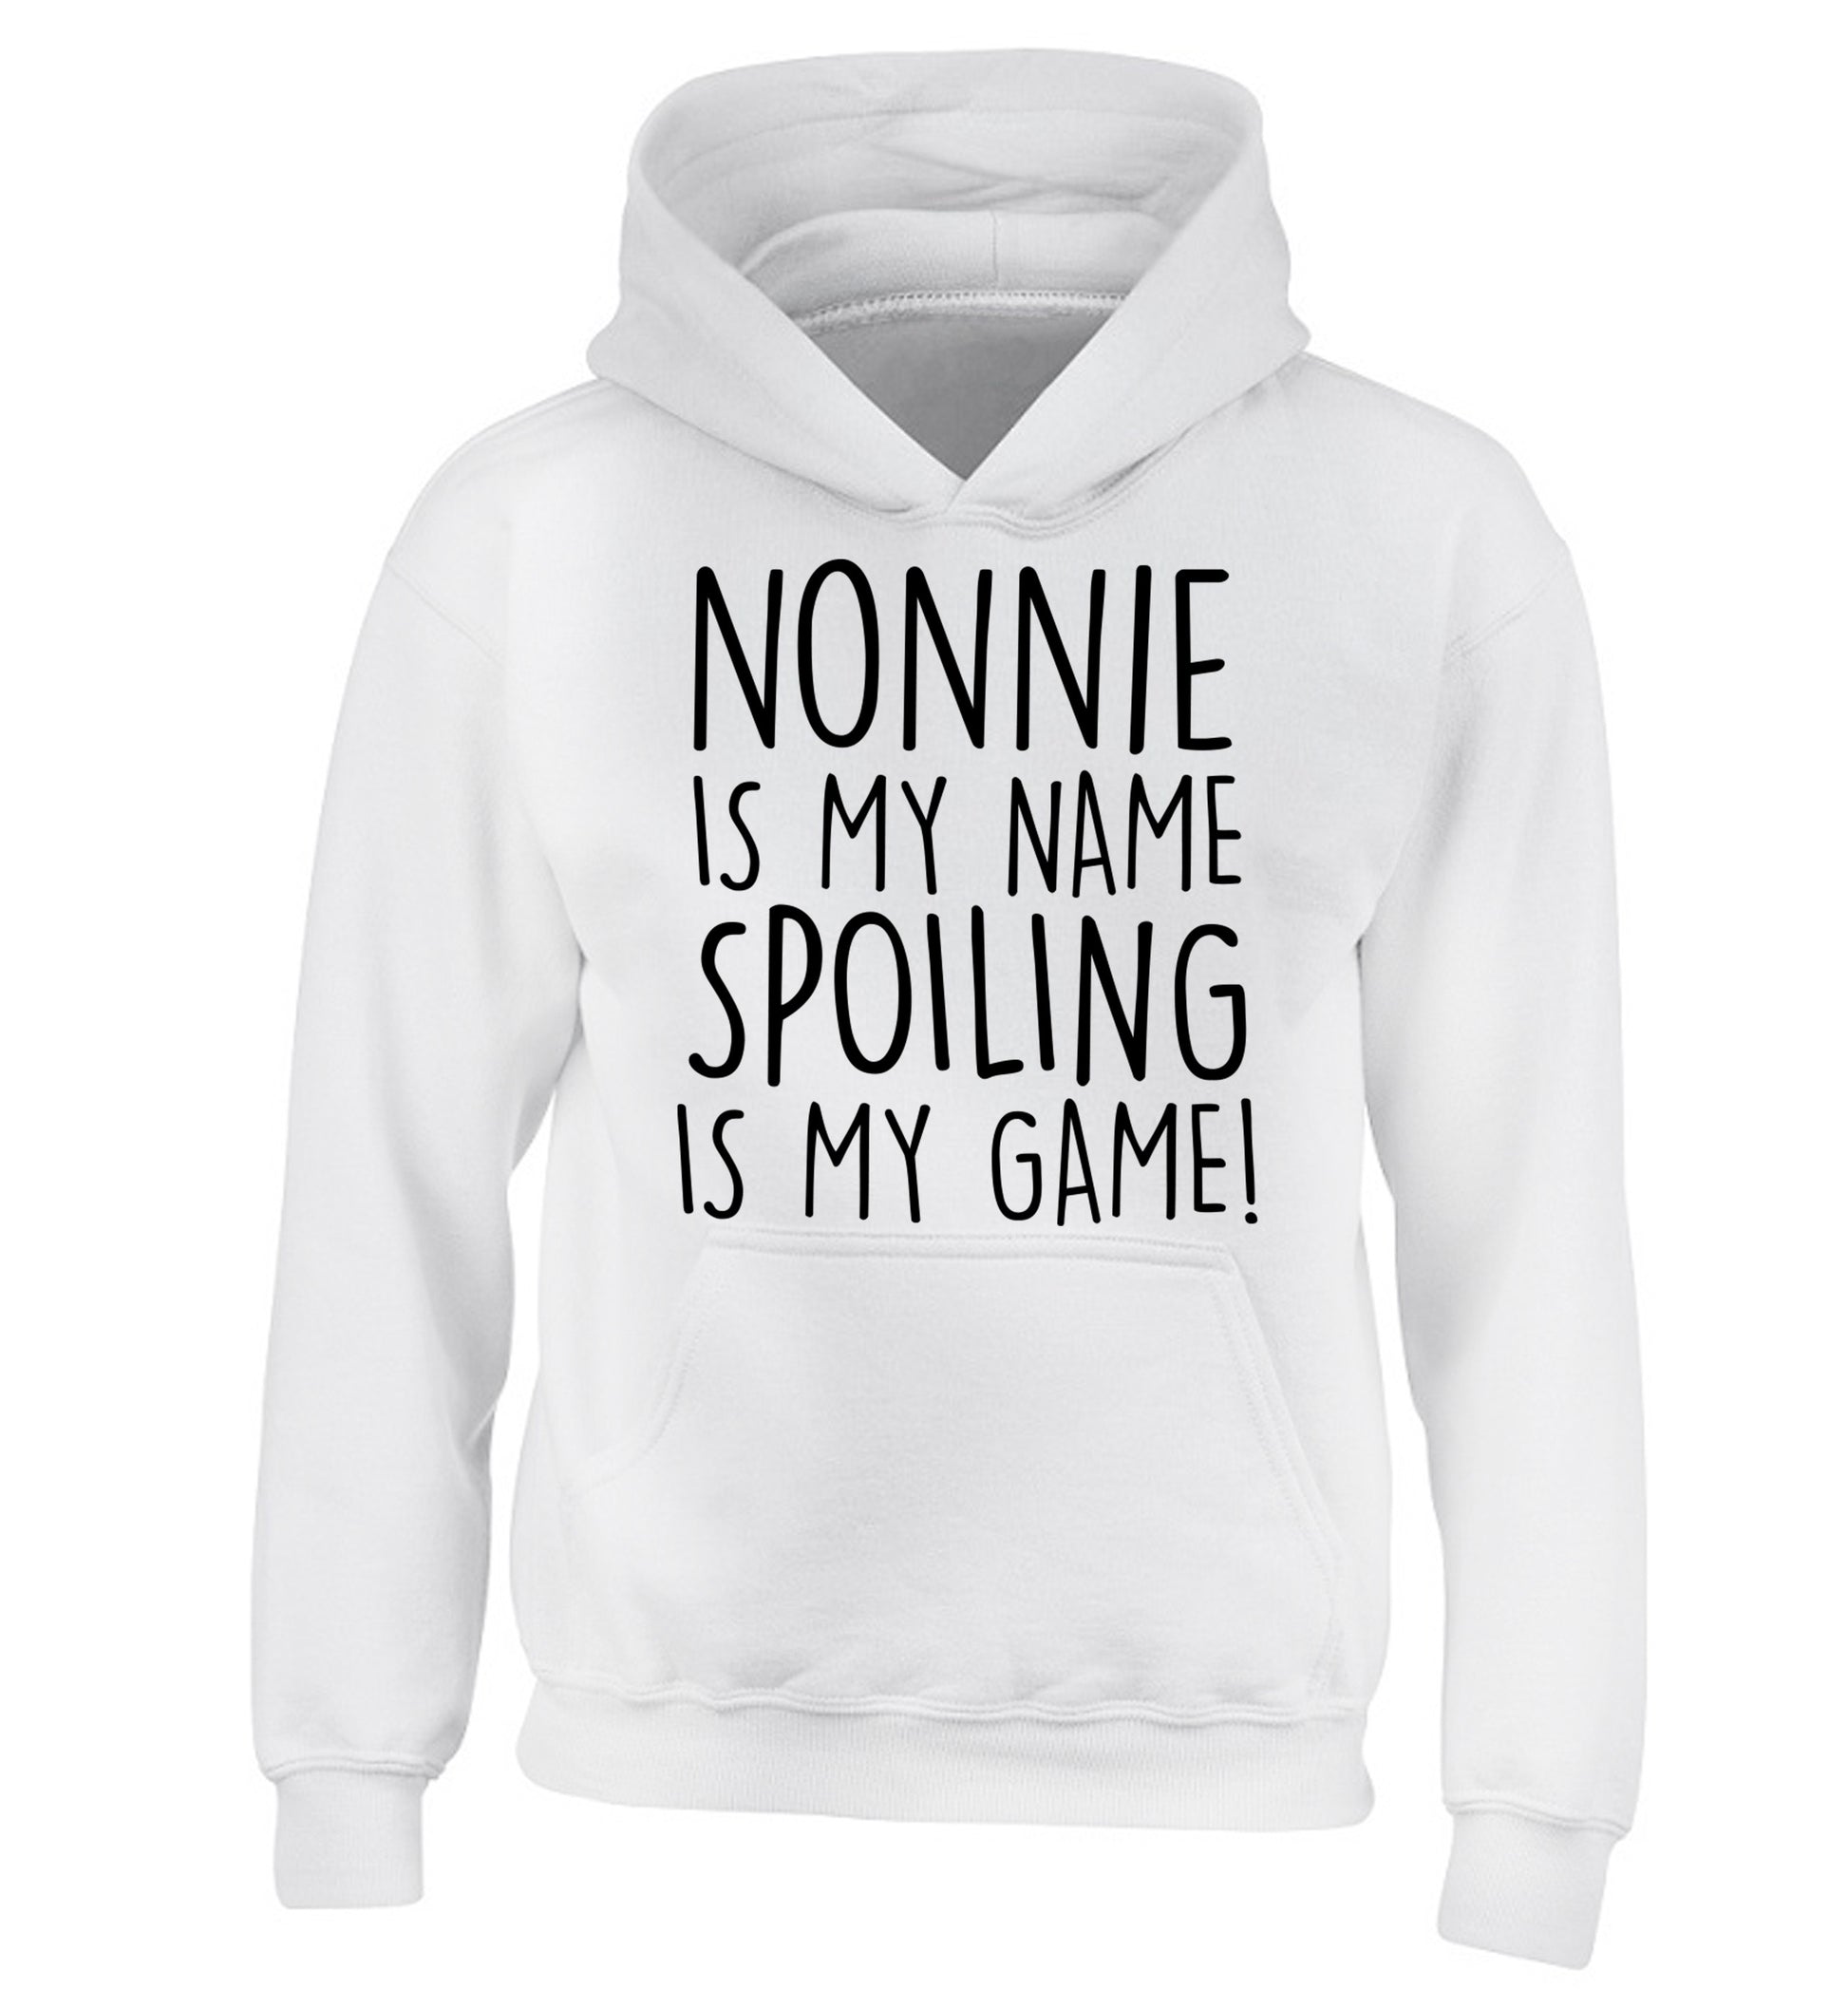 Nonnie is my name, spoiling is my game children's white hoodie 12-14 Years